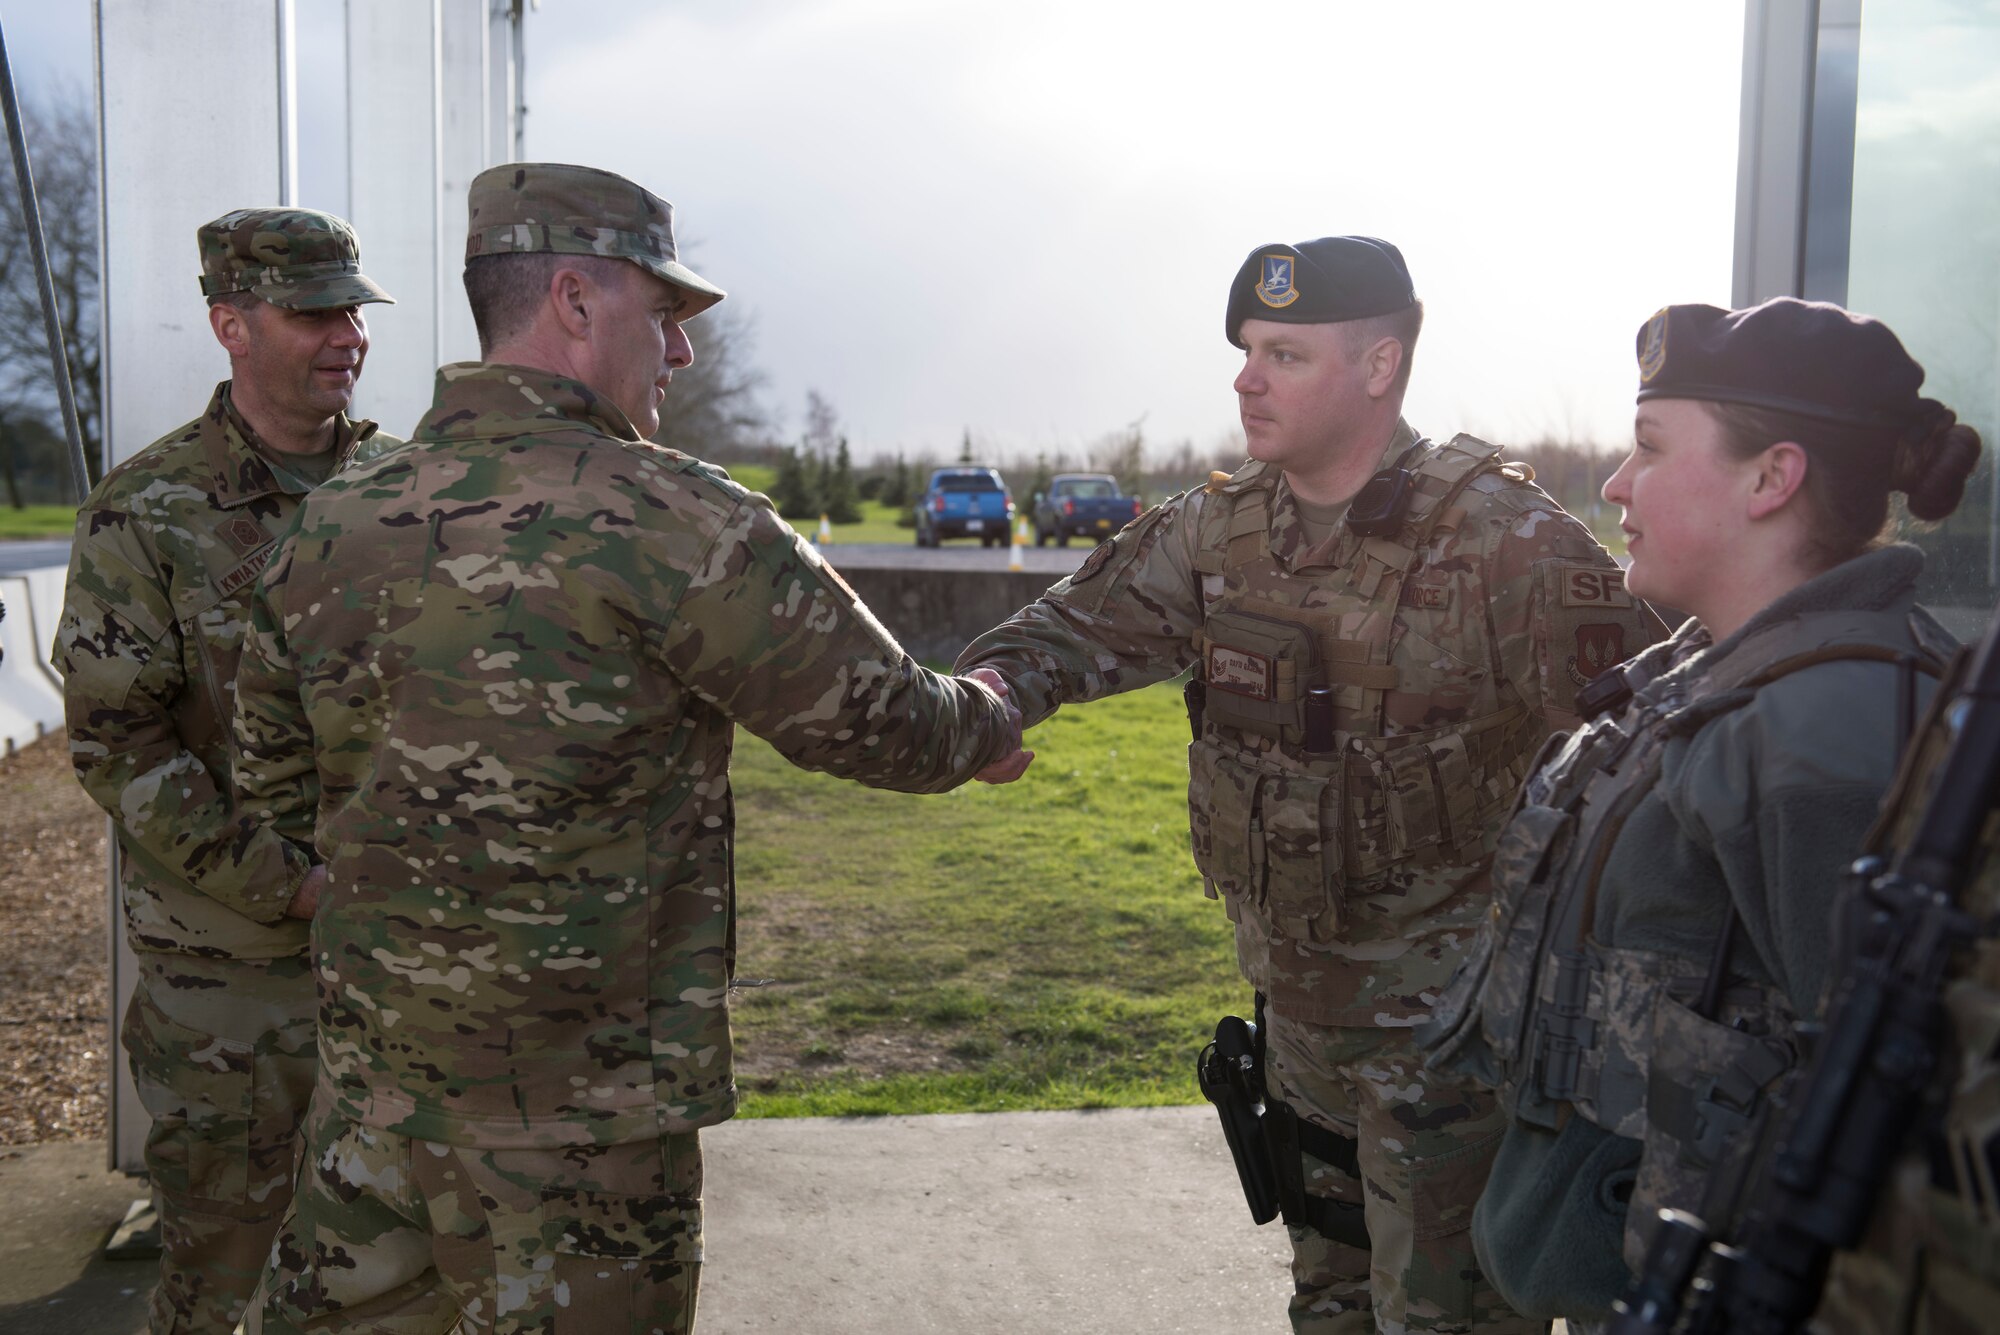 U.S. Air Force Maj. Gen. John Wood, Third Air Force commander, greets Tech. Sgt. David Gajeske, 423rd Security Forces Squadron flight sergeant, during a tour at the RAF Alconbury main gate, England, March 3, 2020. Wood and Chief Master Sgt. Randy Kwiatkowski, Third Air Force command chief, visited 501st Combat Support Wing Airmen and facilities and recognized outstanding performers in the wing. (U.S. Air Force photo by Airman 1st Class Jennifer Zima)